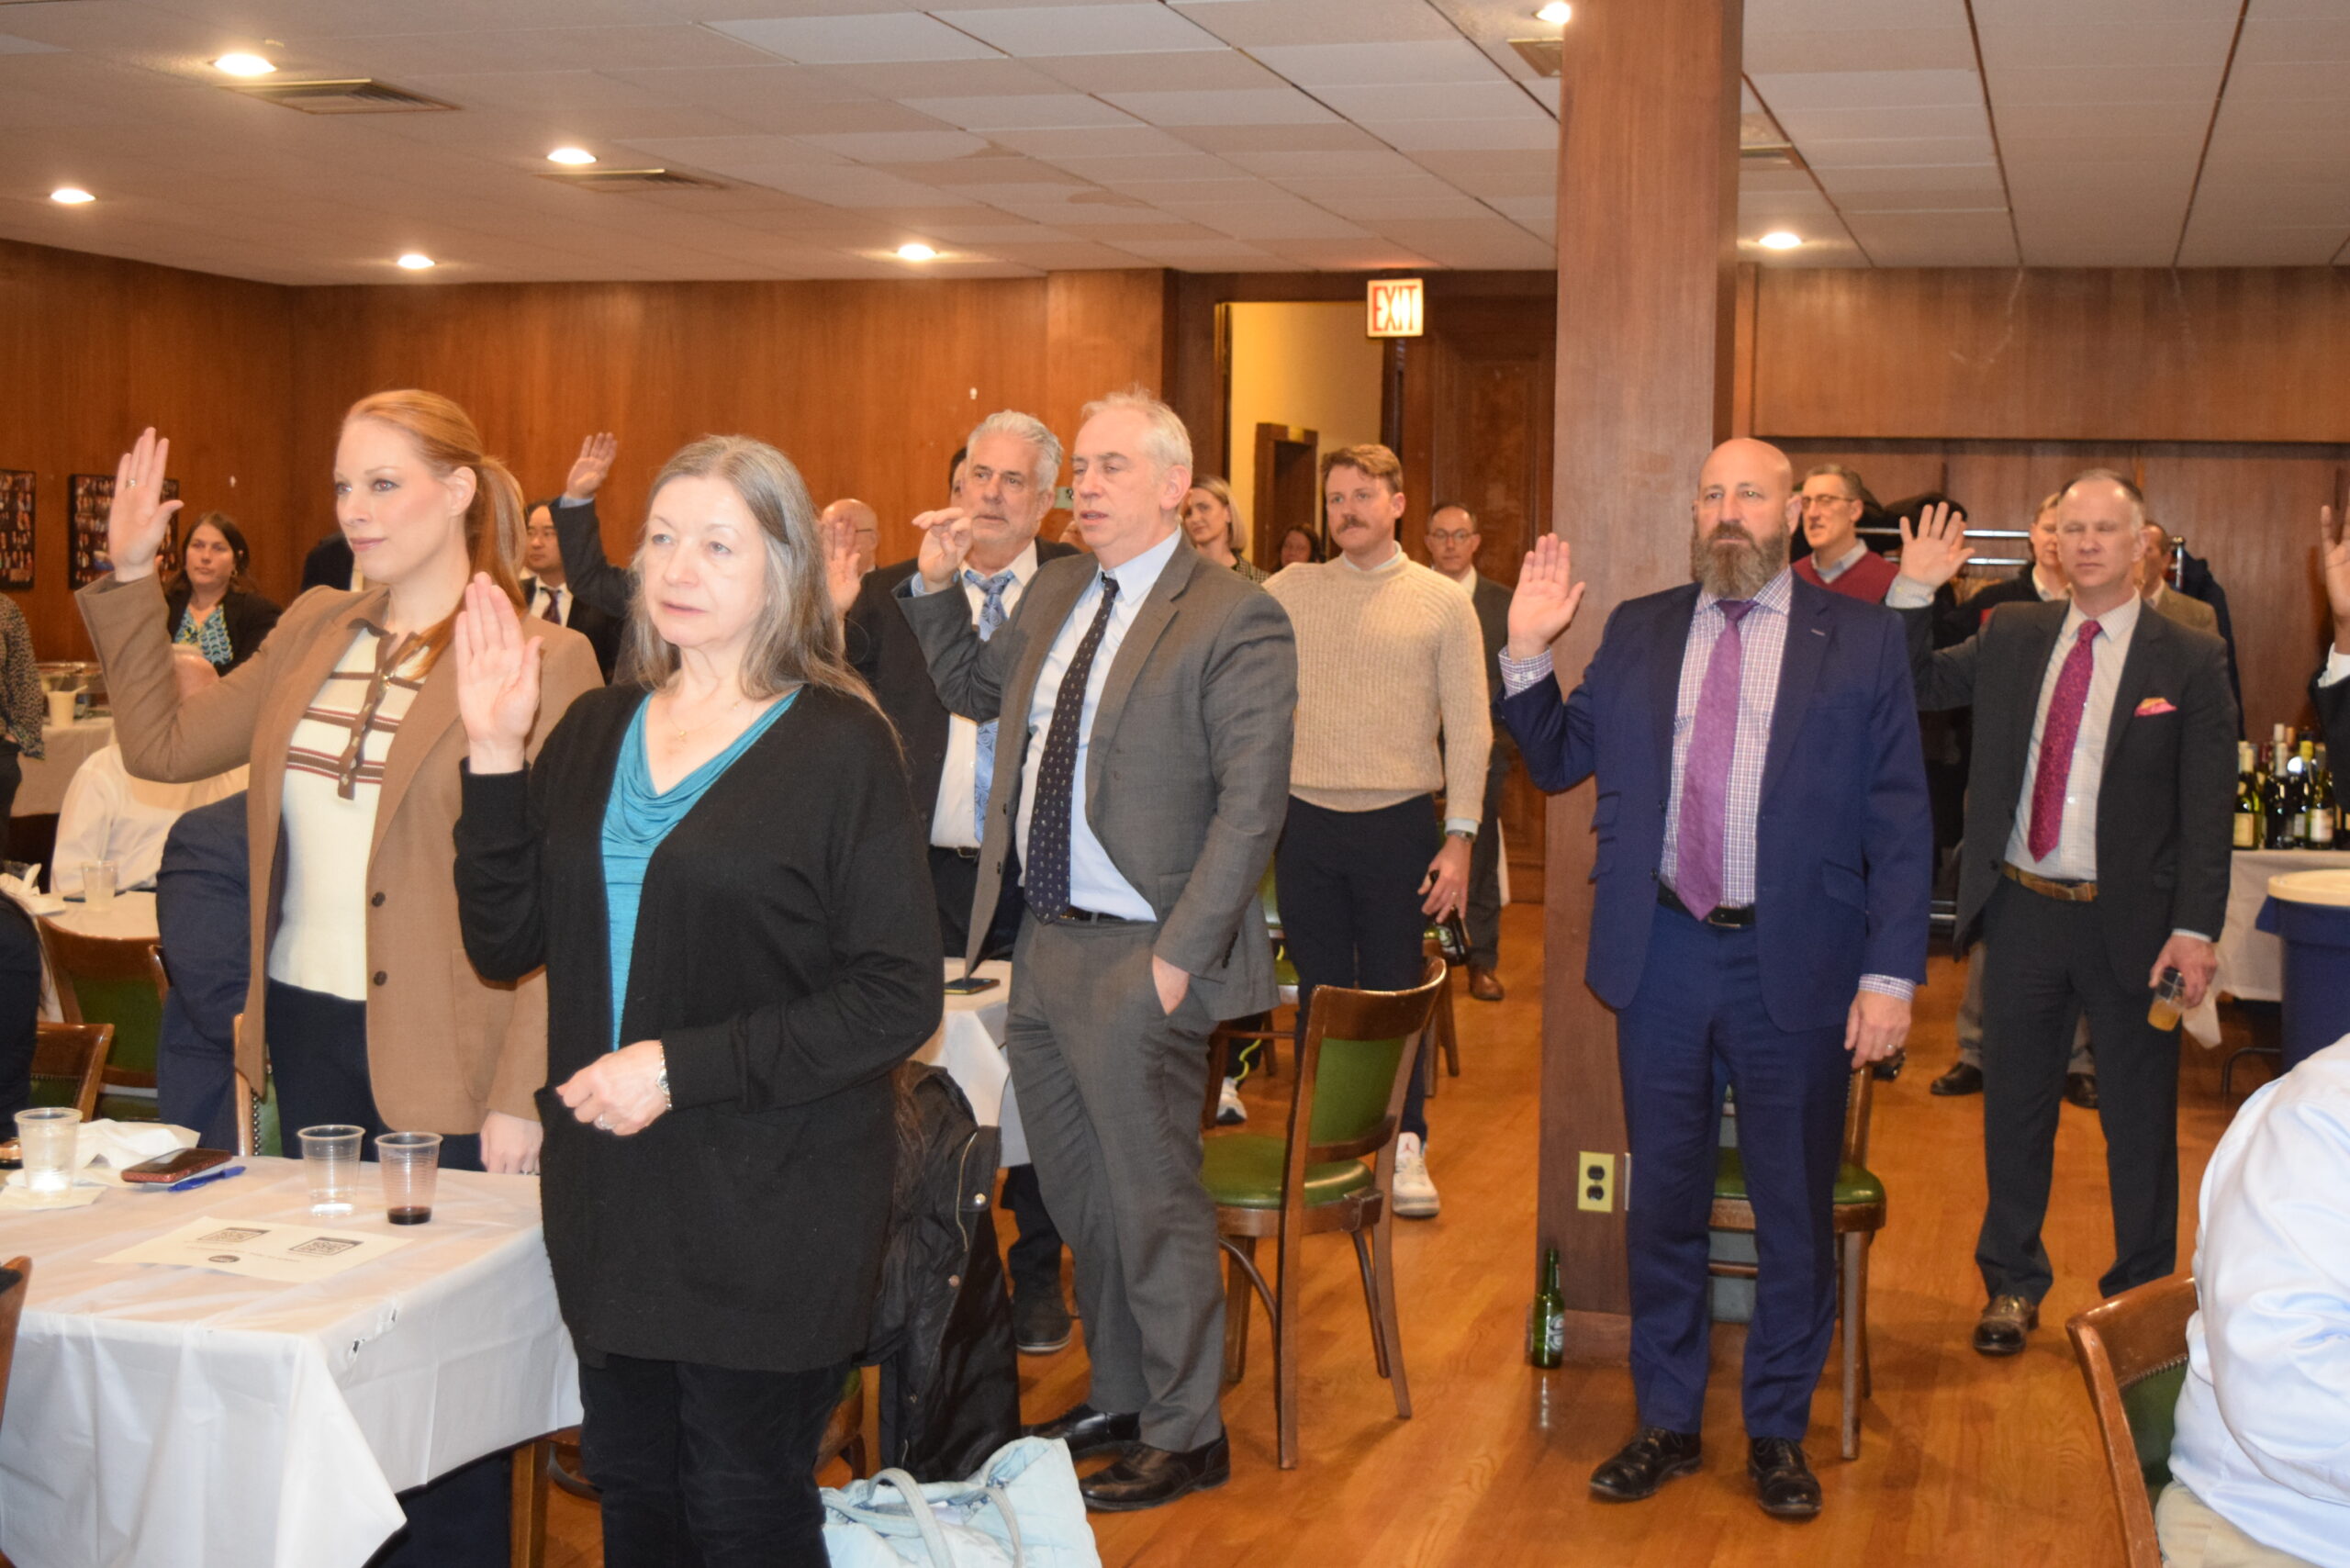 Members of the Board of Directors stand in the audience with their right hands raised, participating in the swearing-in ceremony officiated by Judge Espinal at KCCBA CLA on Federal Crimes.